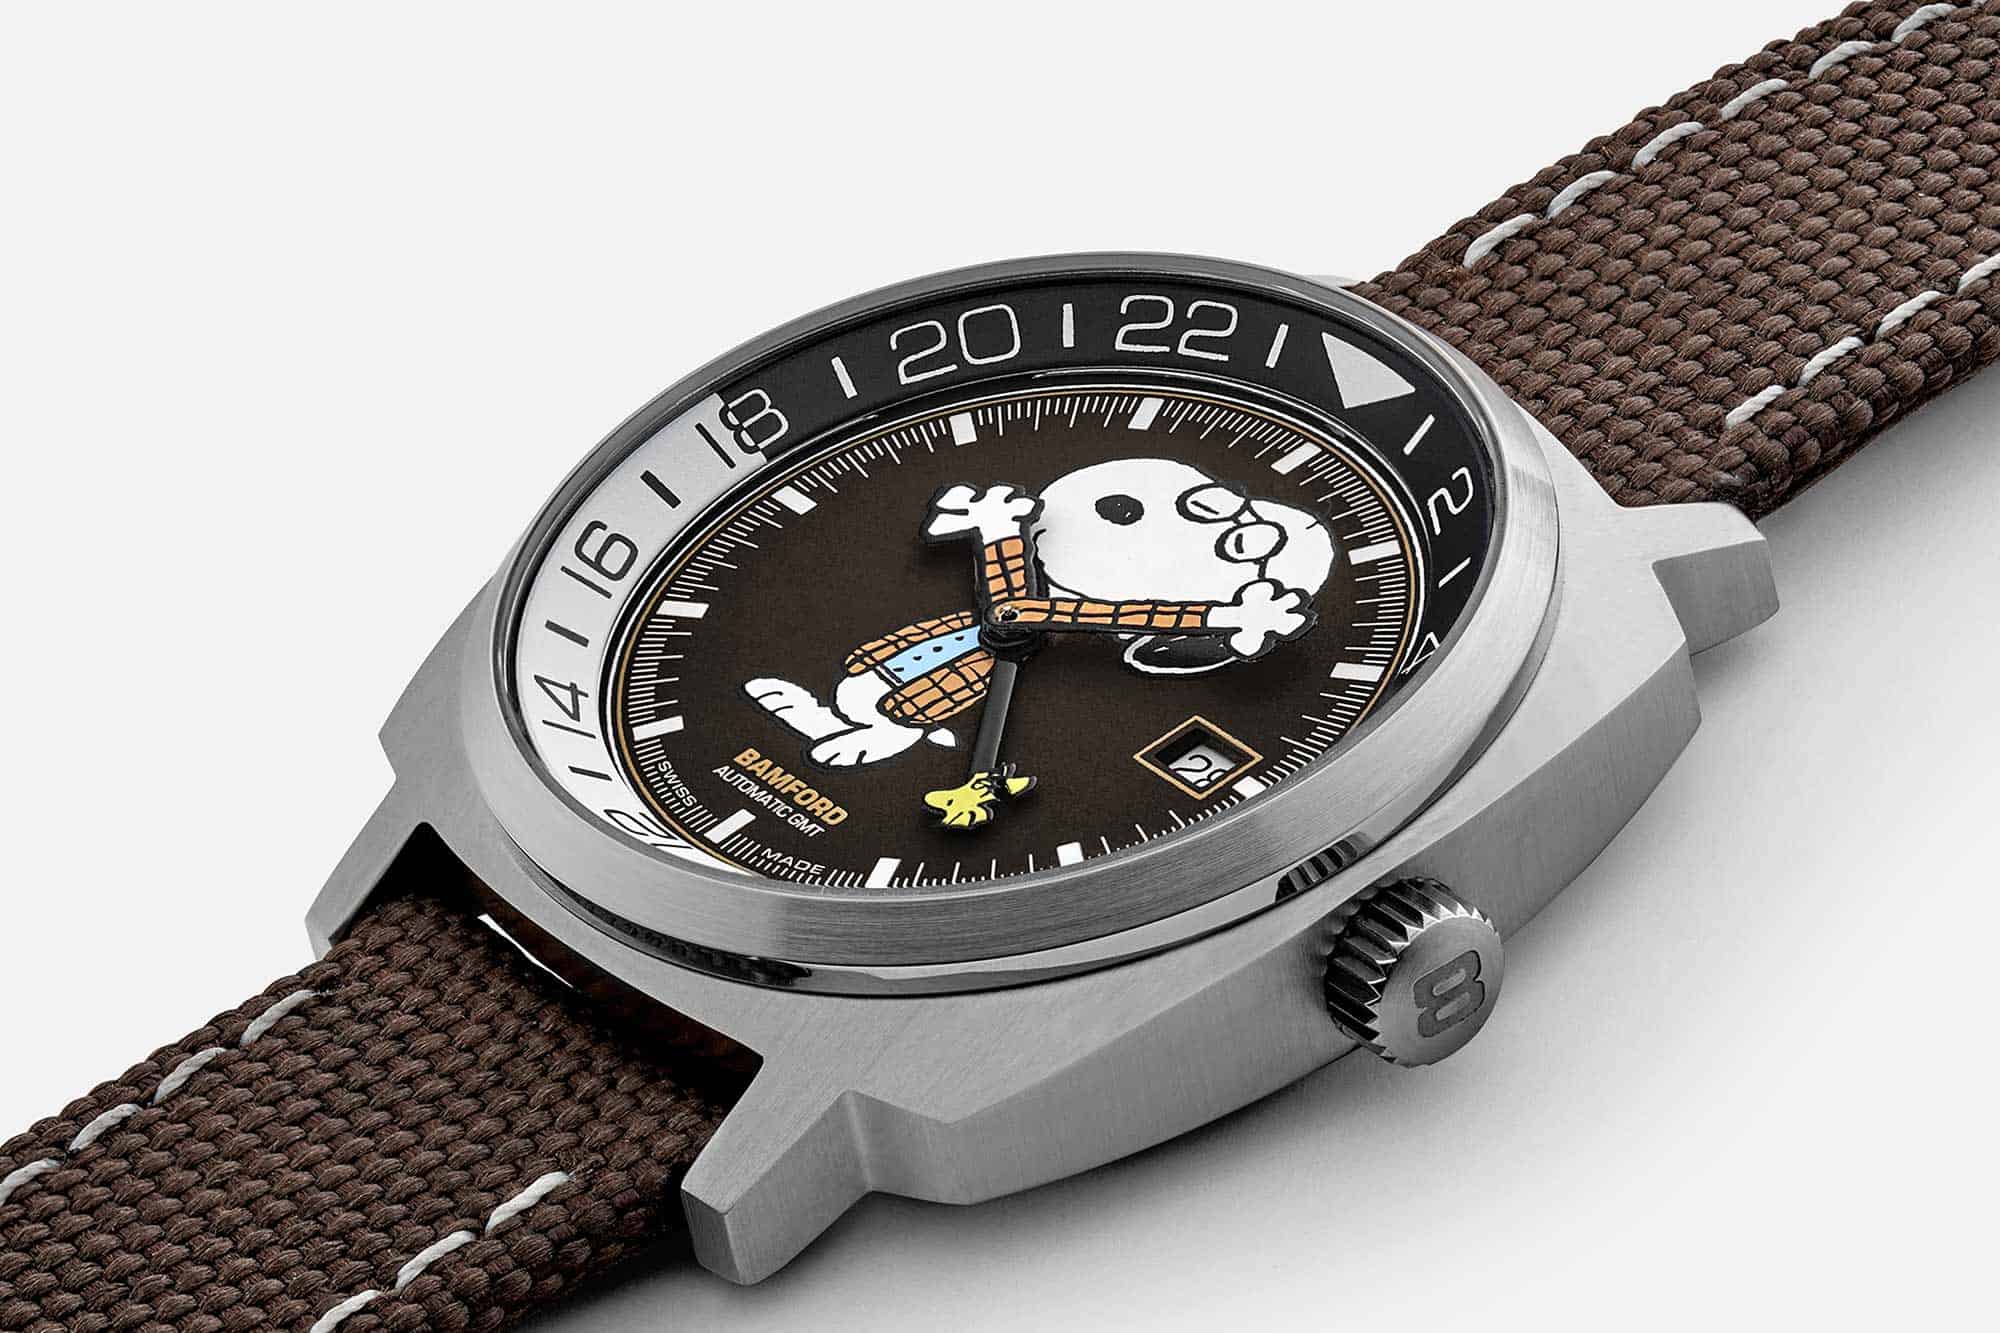 Hodinkee’s Latest Limited Edition is a Collaboration with Bamford Featuring Everyone’s Favorite Cartoon Beagle